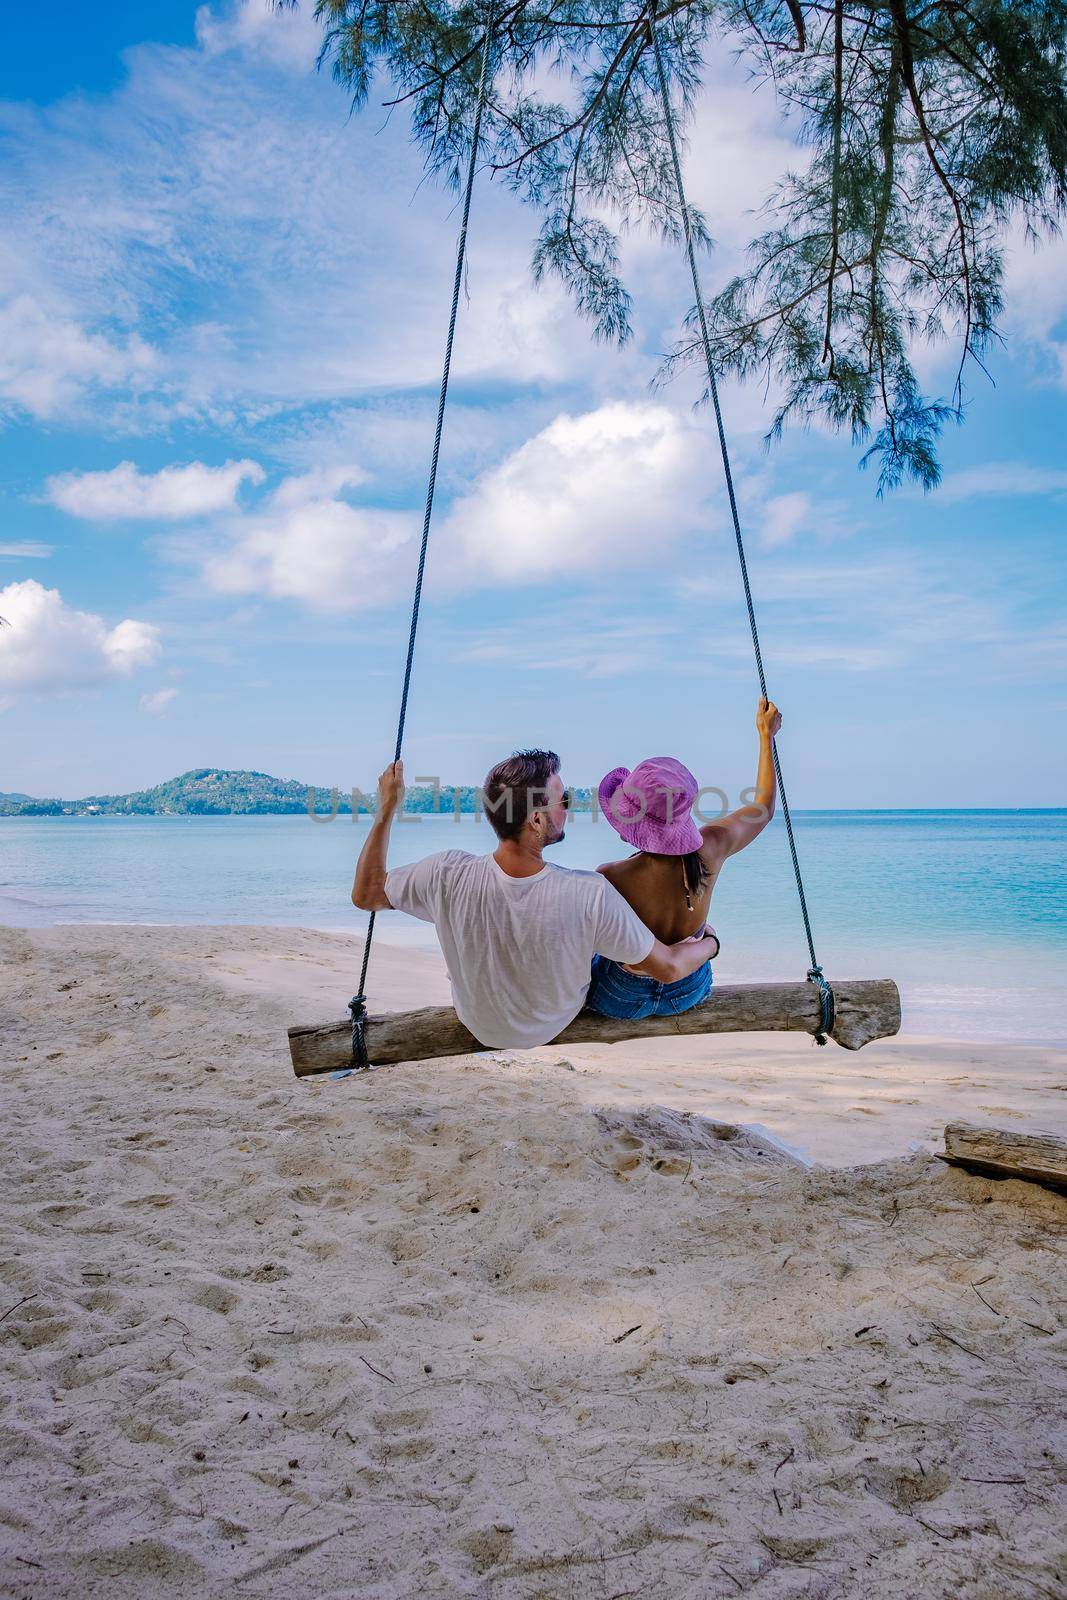 Bang Tao Beach Phuket Thailand, beach with palm trees and a Couple man and women in the swing on the beach. Summer, Travel, Vacation, and Holiday concept - Swing hangs from coconut palm tree